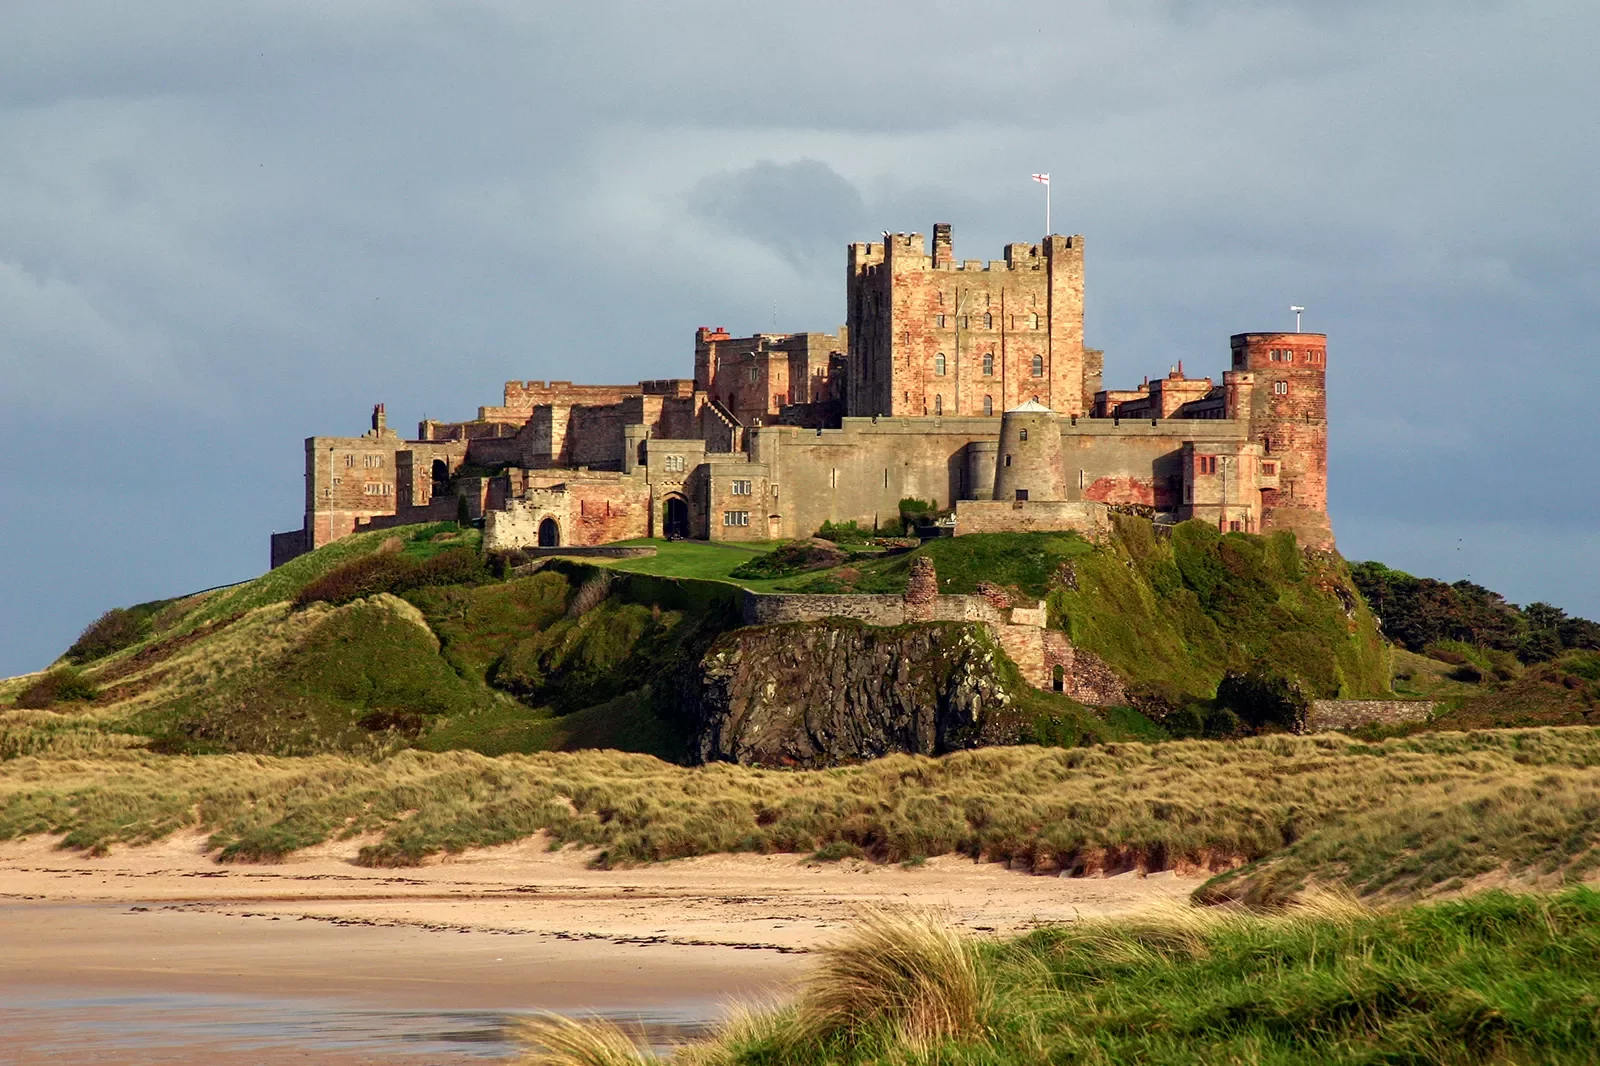 castle on a hill by a beach